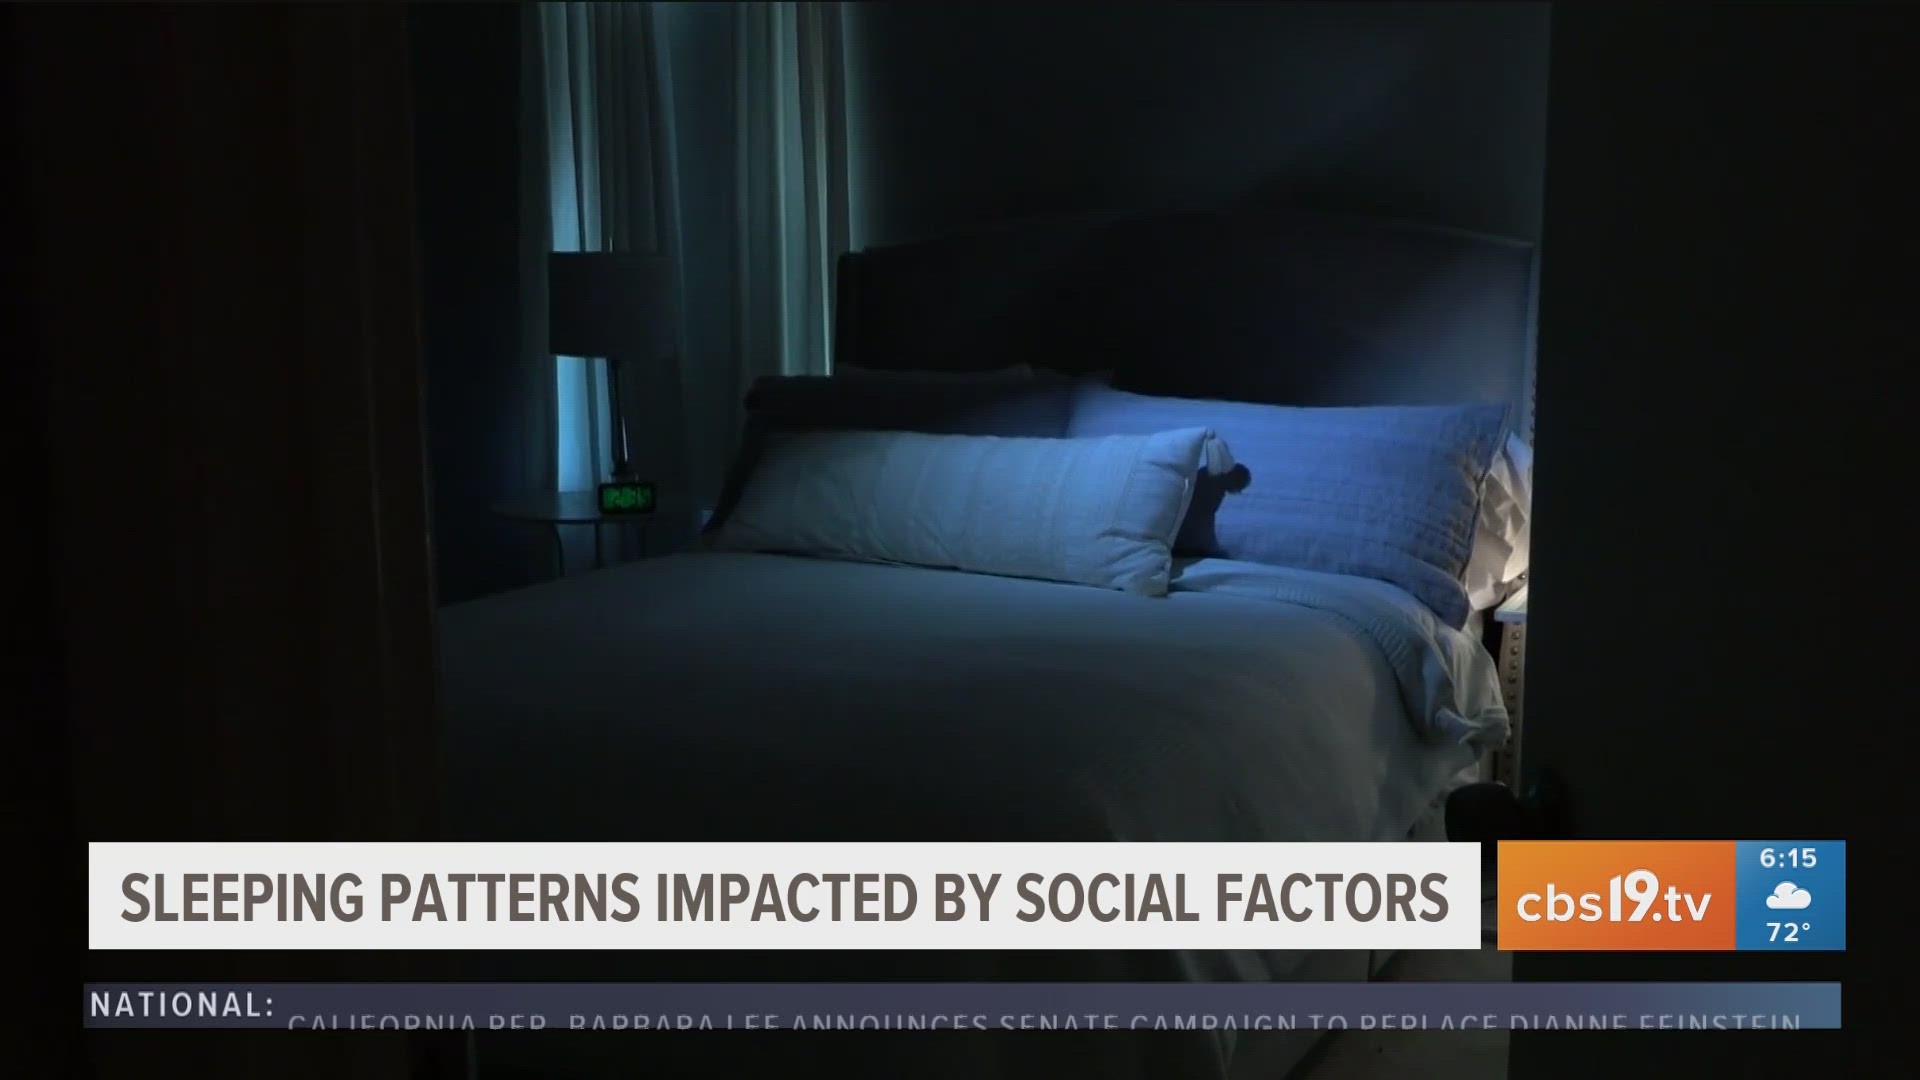 Did you know sleep issues can be caused by social factors?